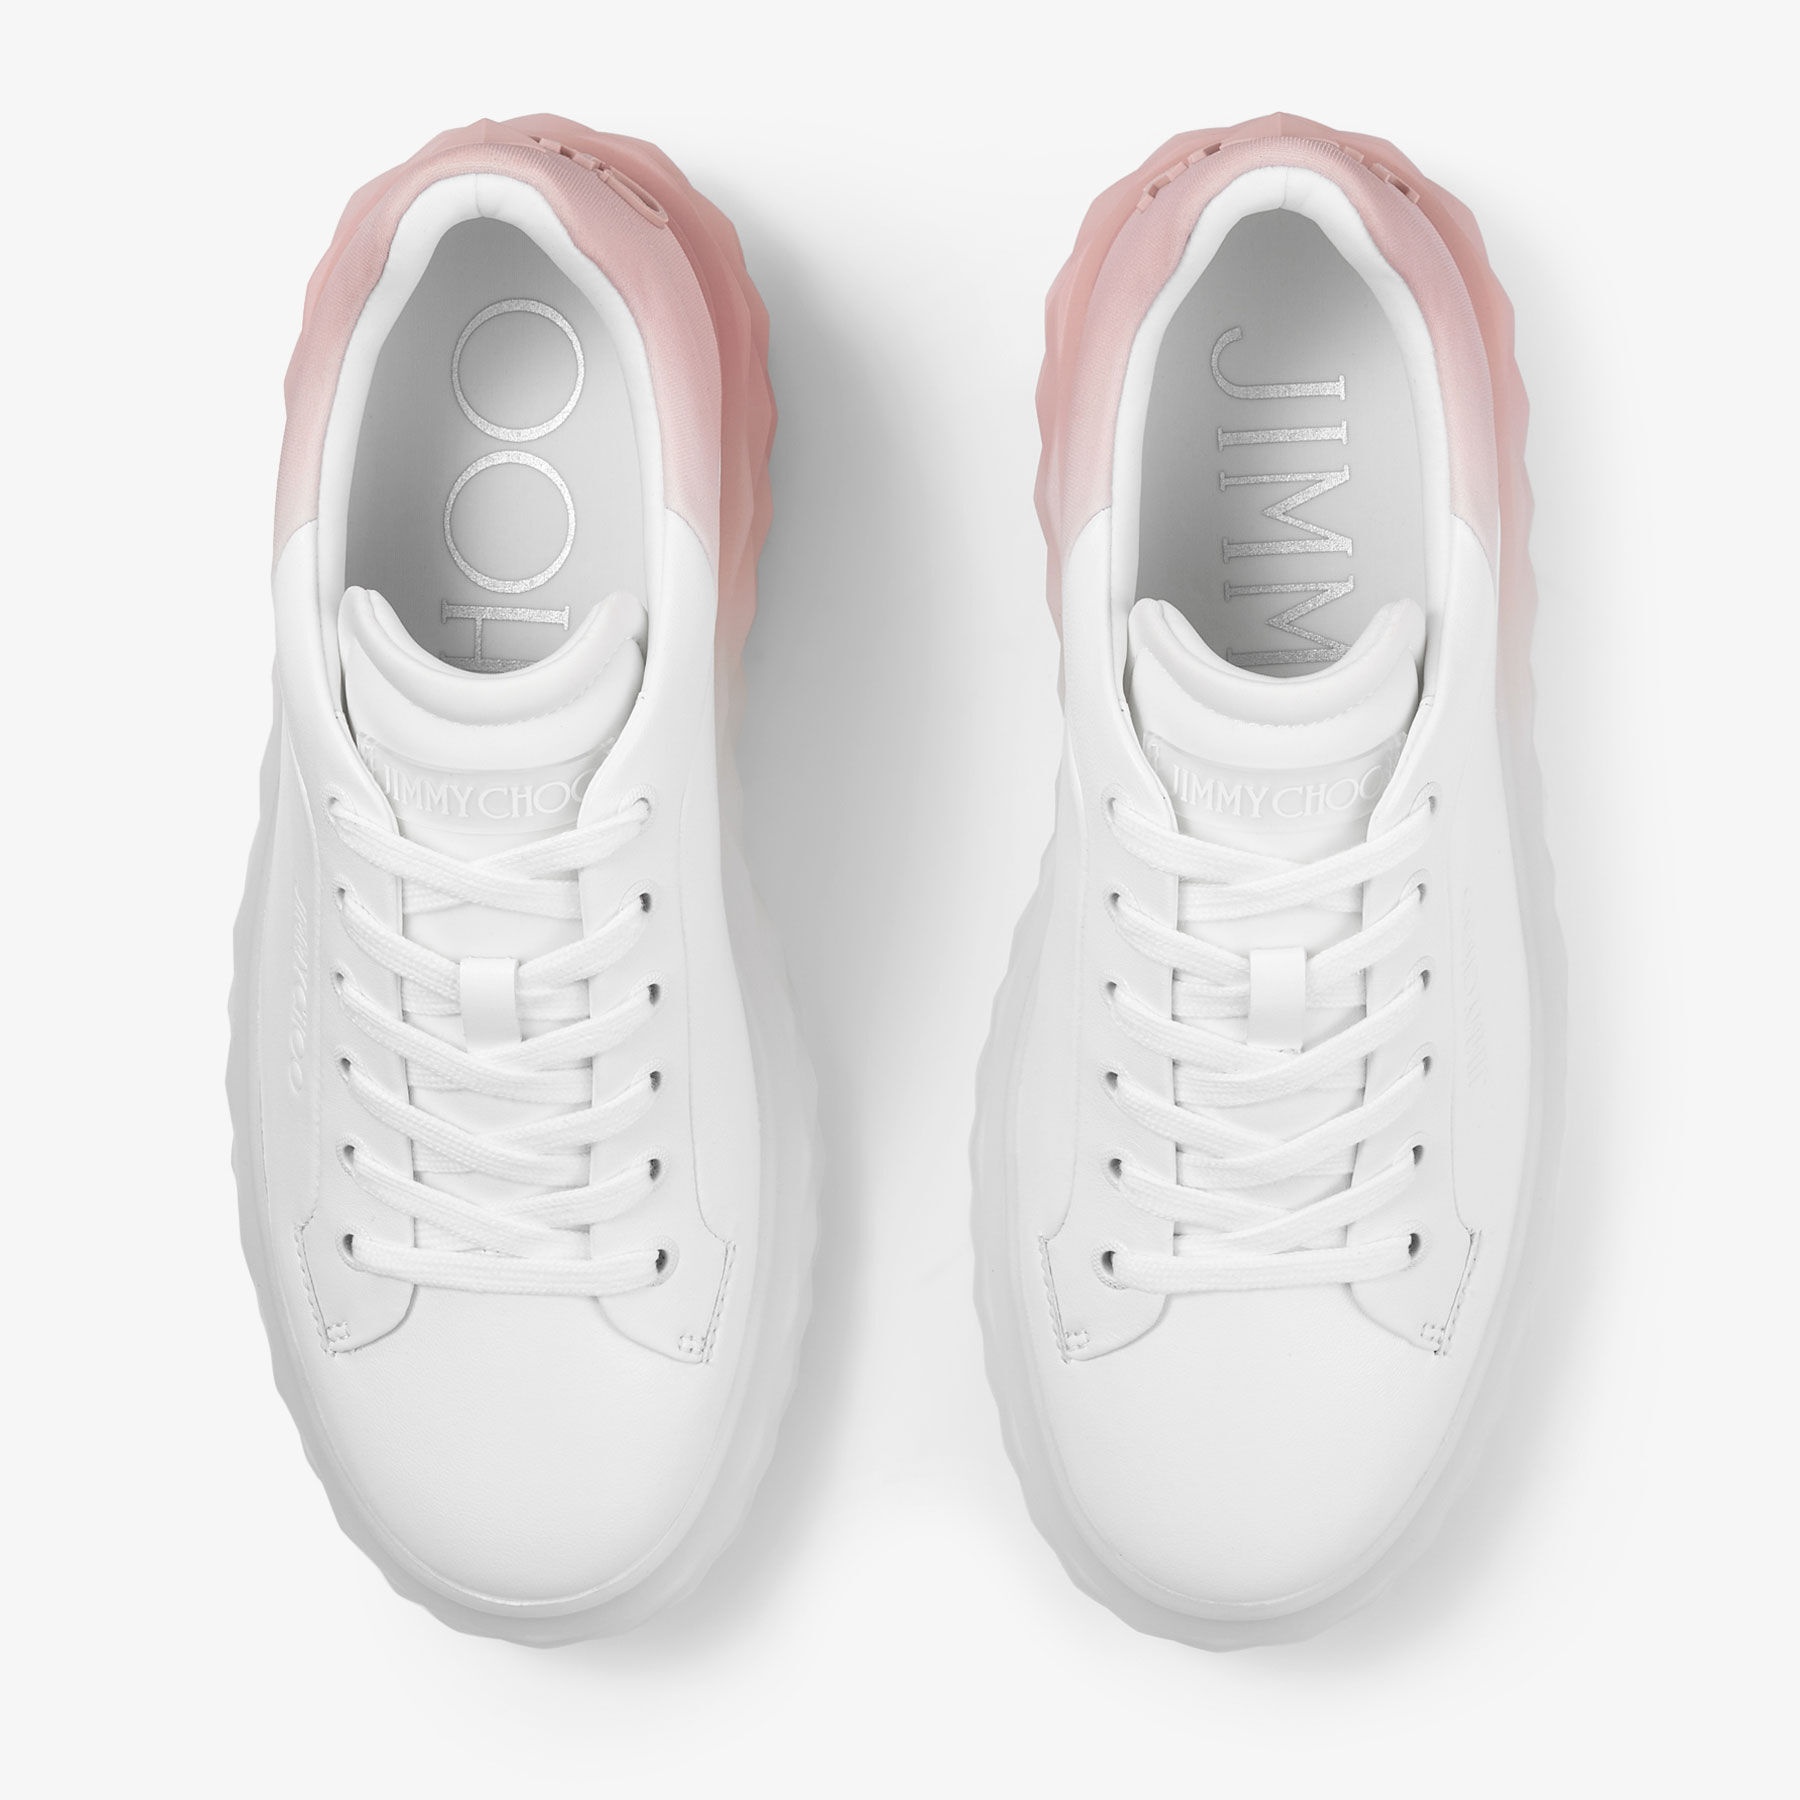 Diamond Maxi/F II
White and Macaron Leather Trainers with Platform Sole - 4